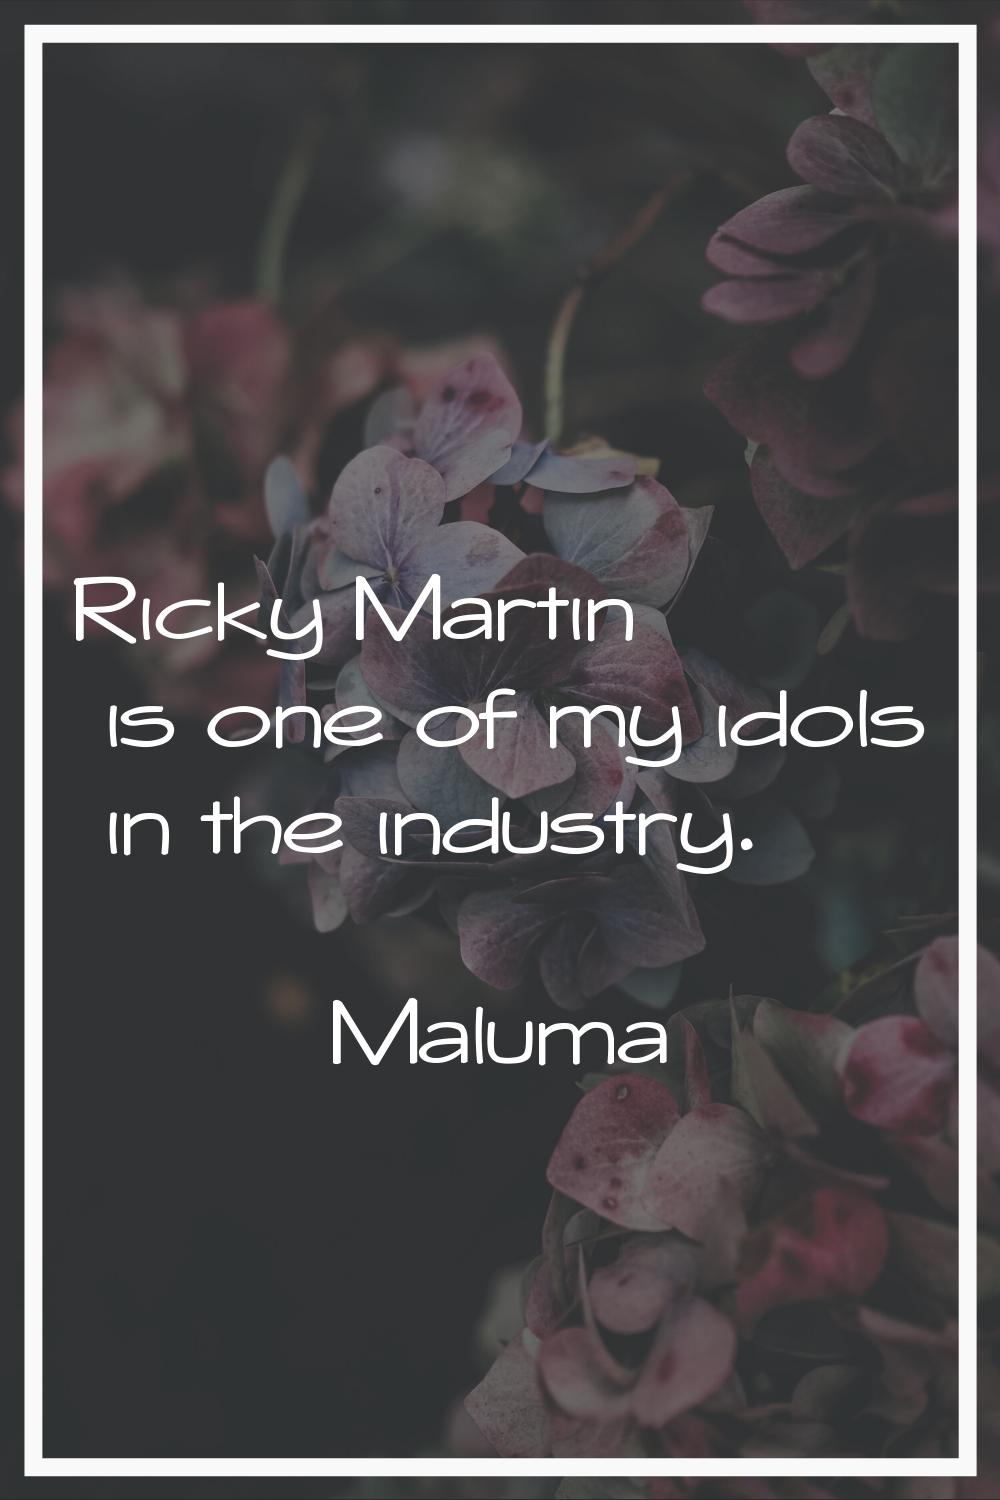 Ricky Martin is one of my idols in the industry.